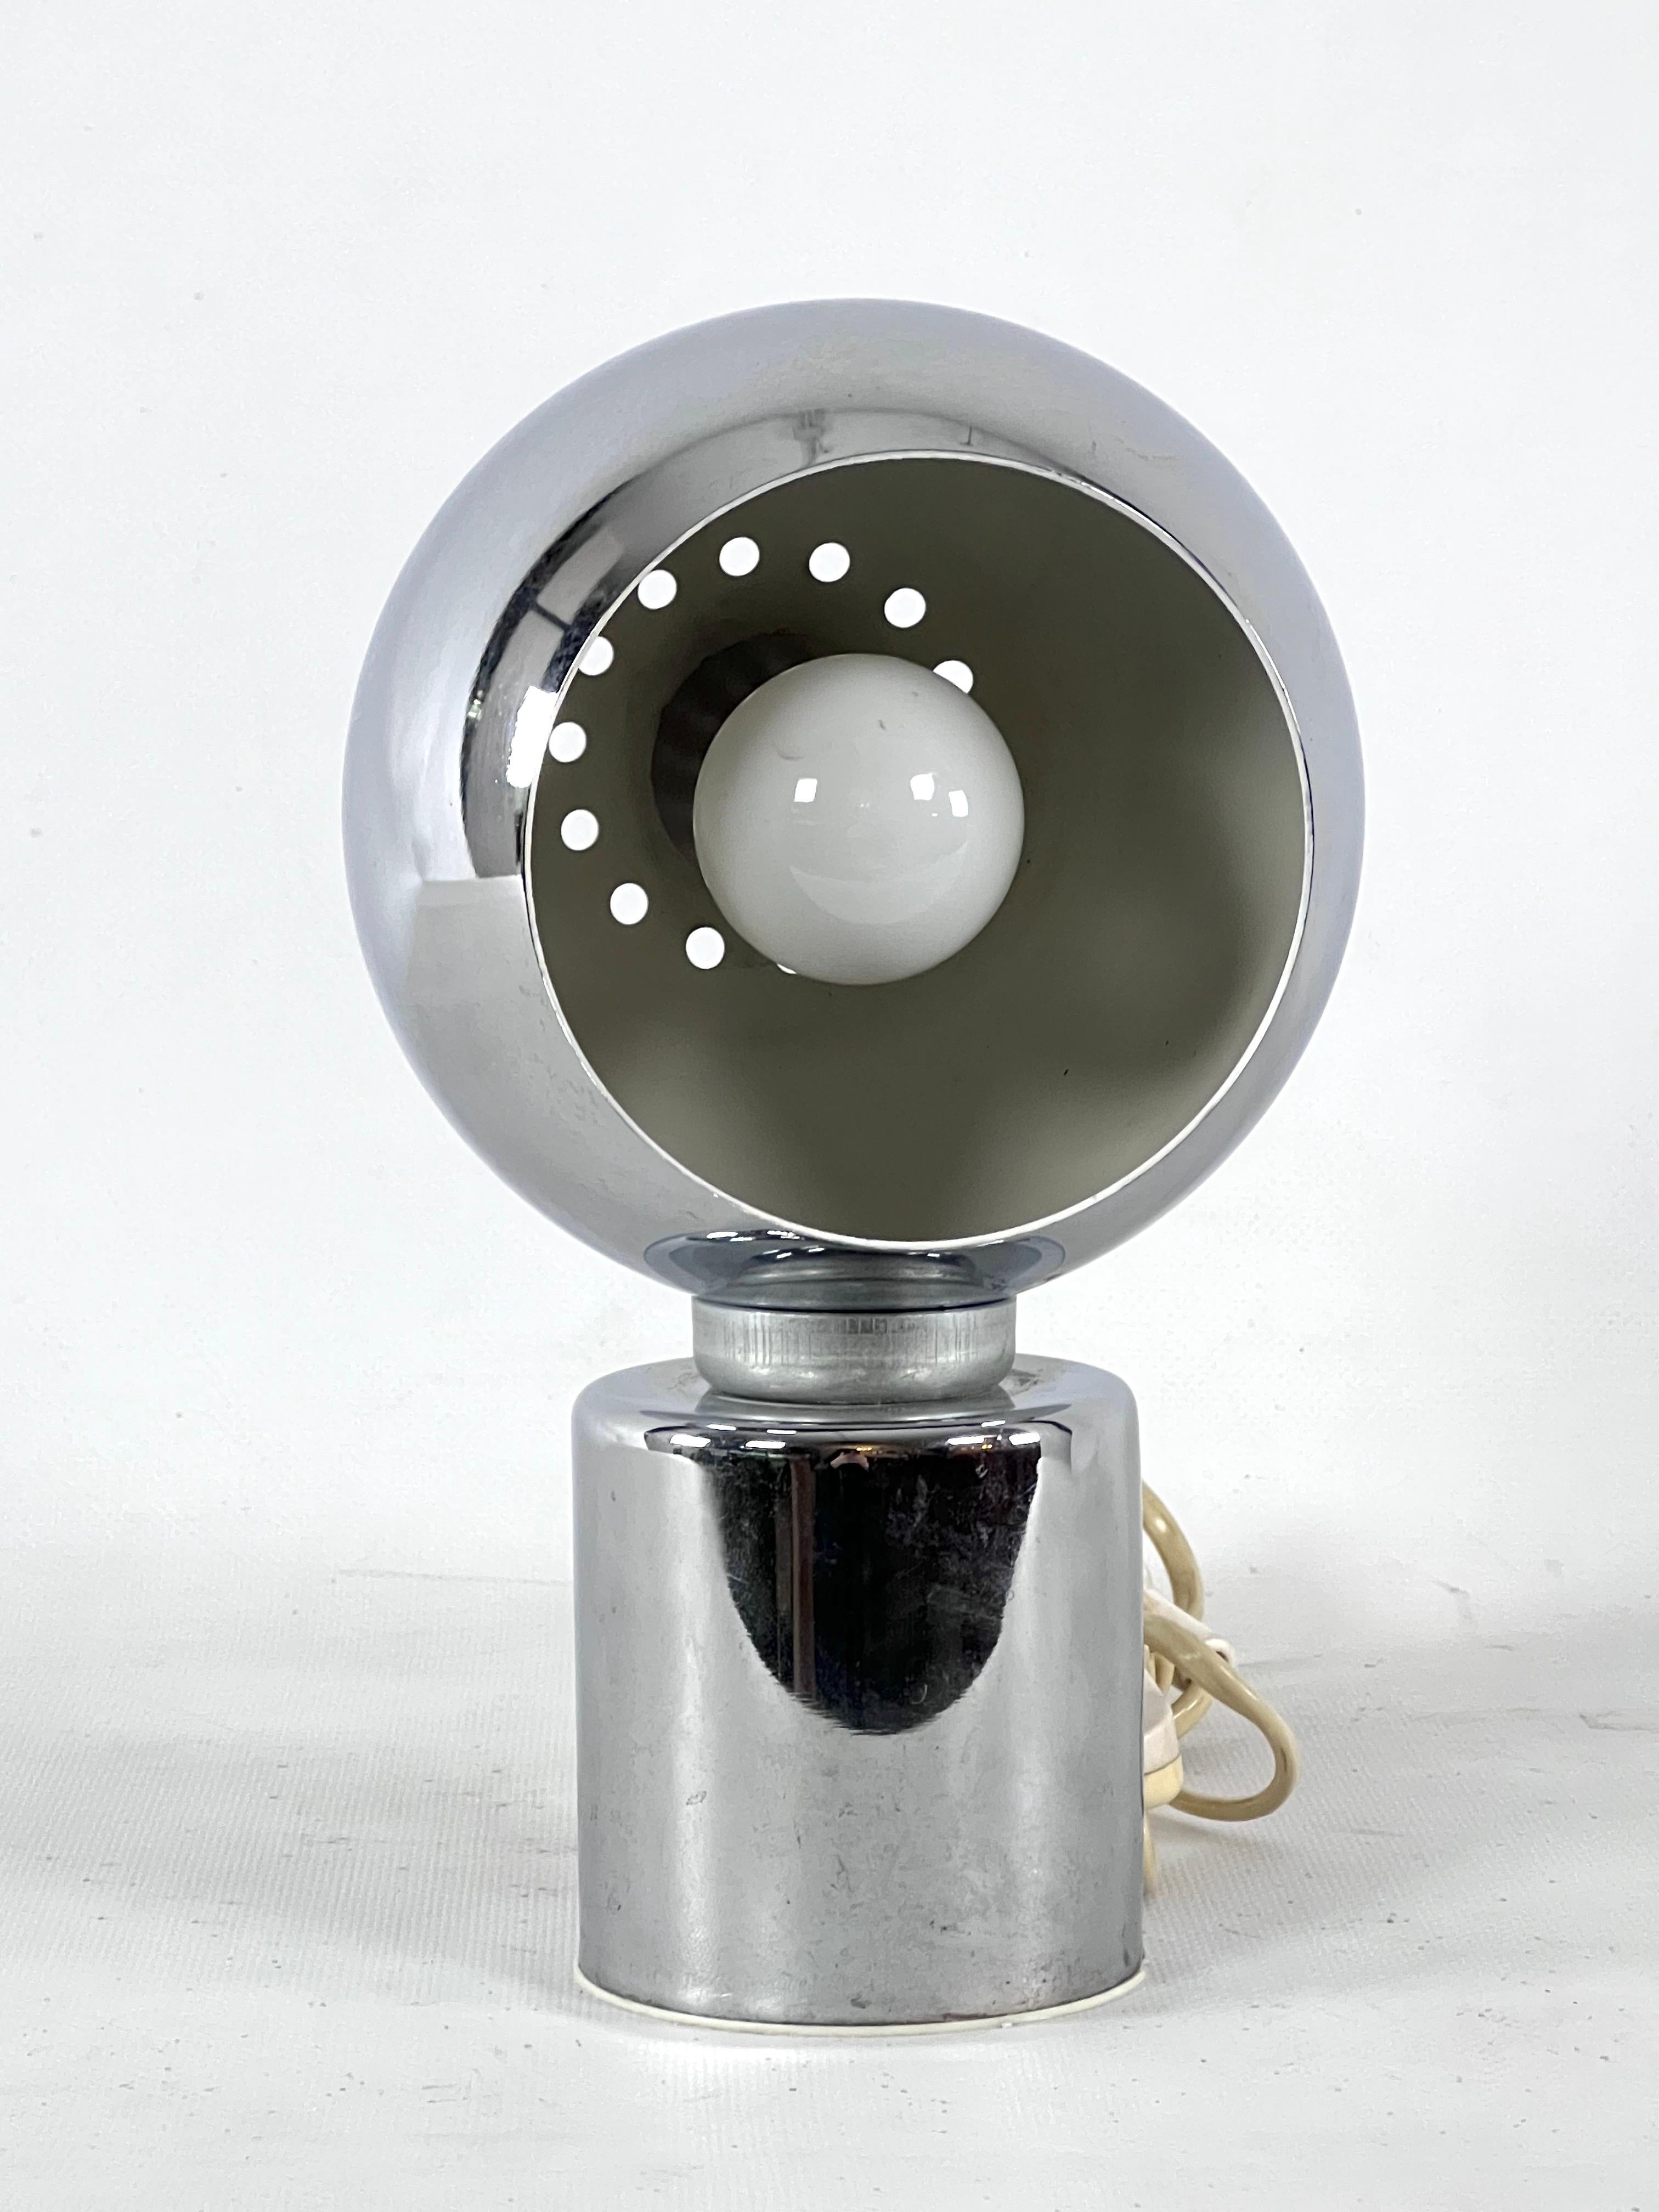 Good vintage condition with normal trace of age and use for this chrome table lamp produced by Reggiani during the 70s. Labeled. The chrome spere is jointed by a magnet holder. Full working with EU standard, adaptable on demand for USA standard.